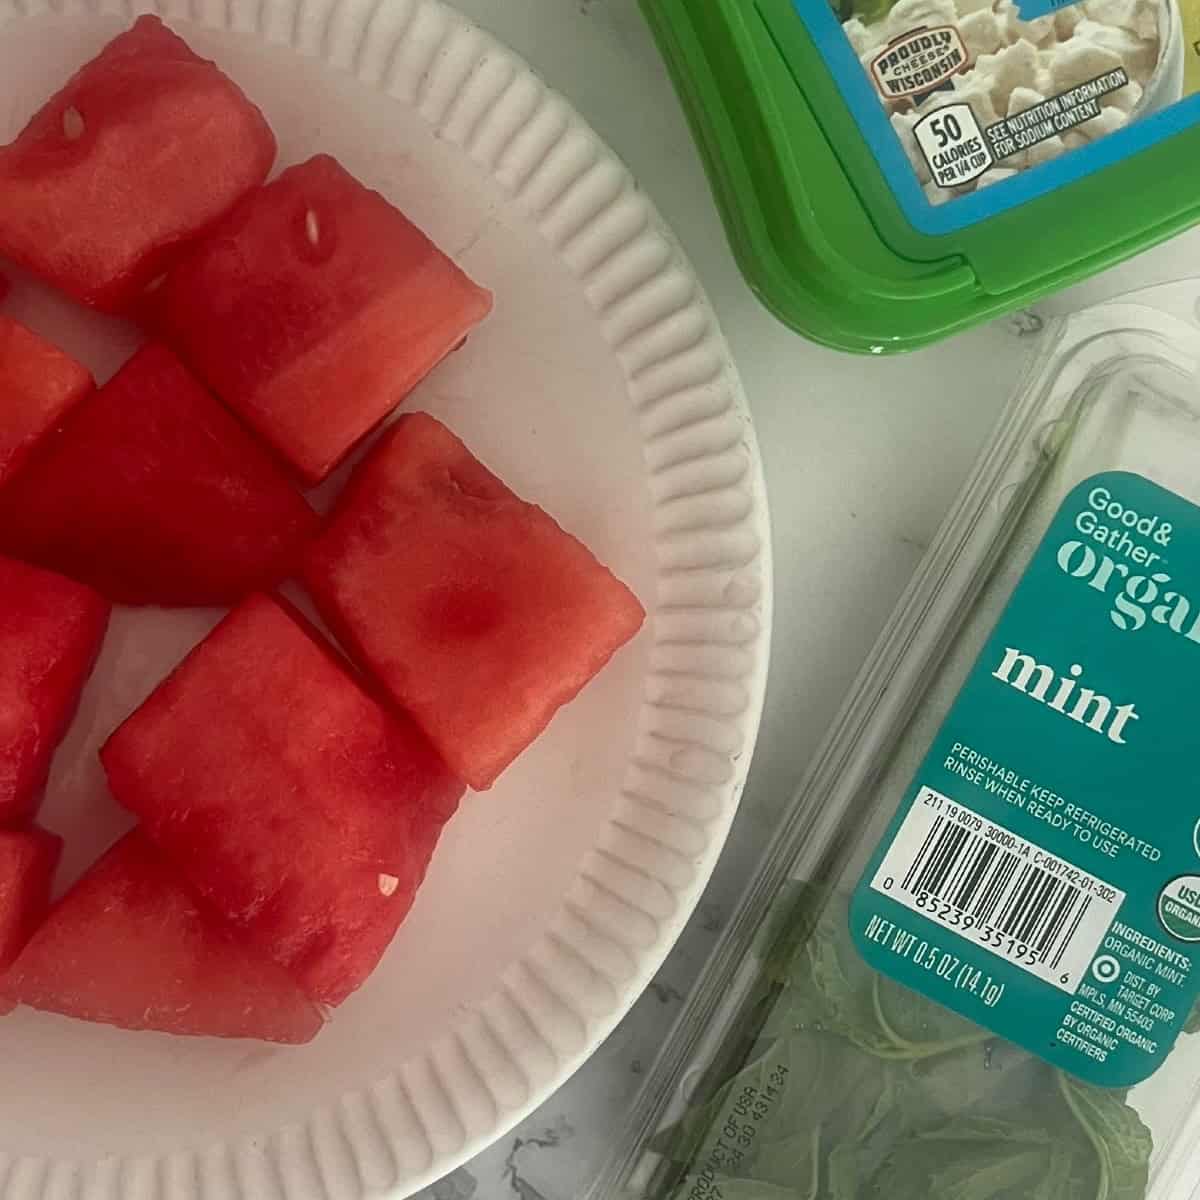 ingredients needed for watermelon salad include watermelon, goat cheese and mint leaves